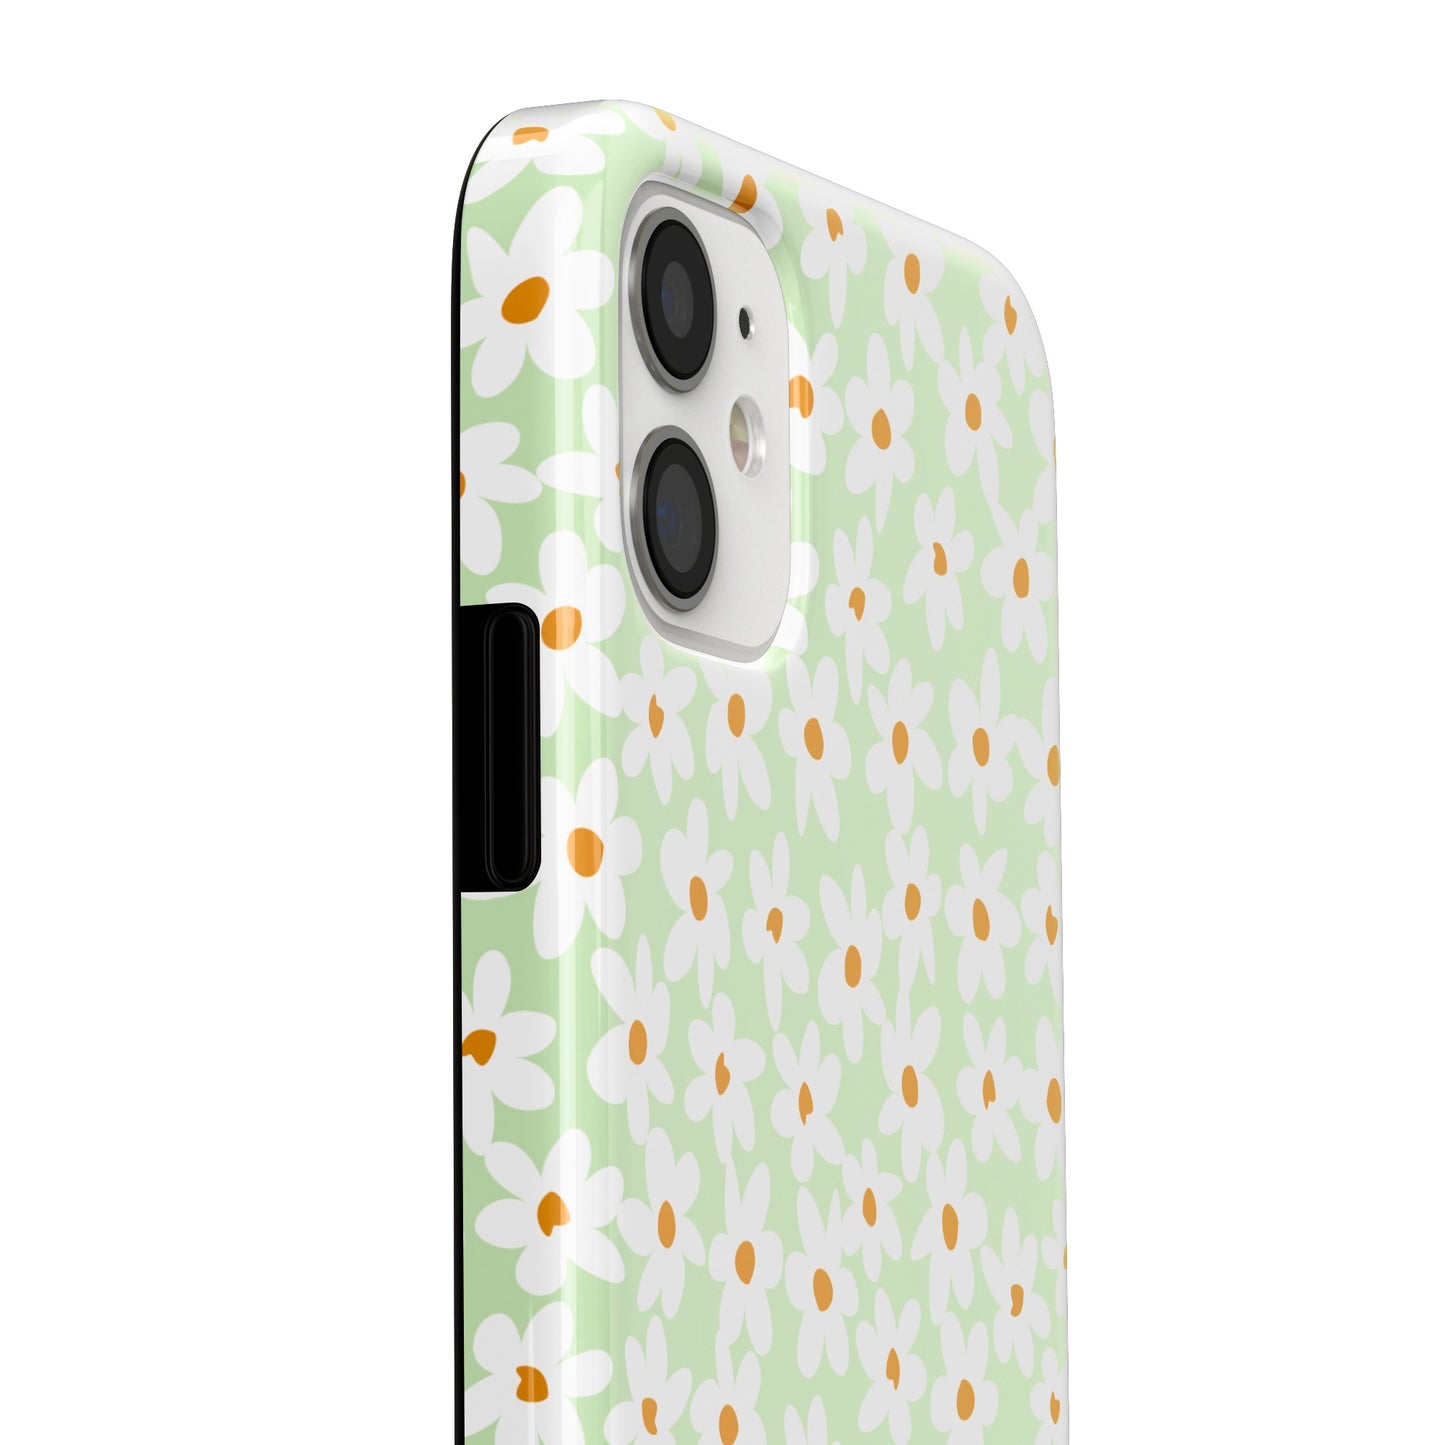 Oopsy Daisy iPhone Case